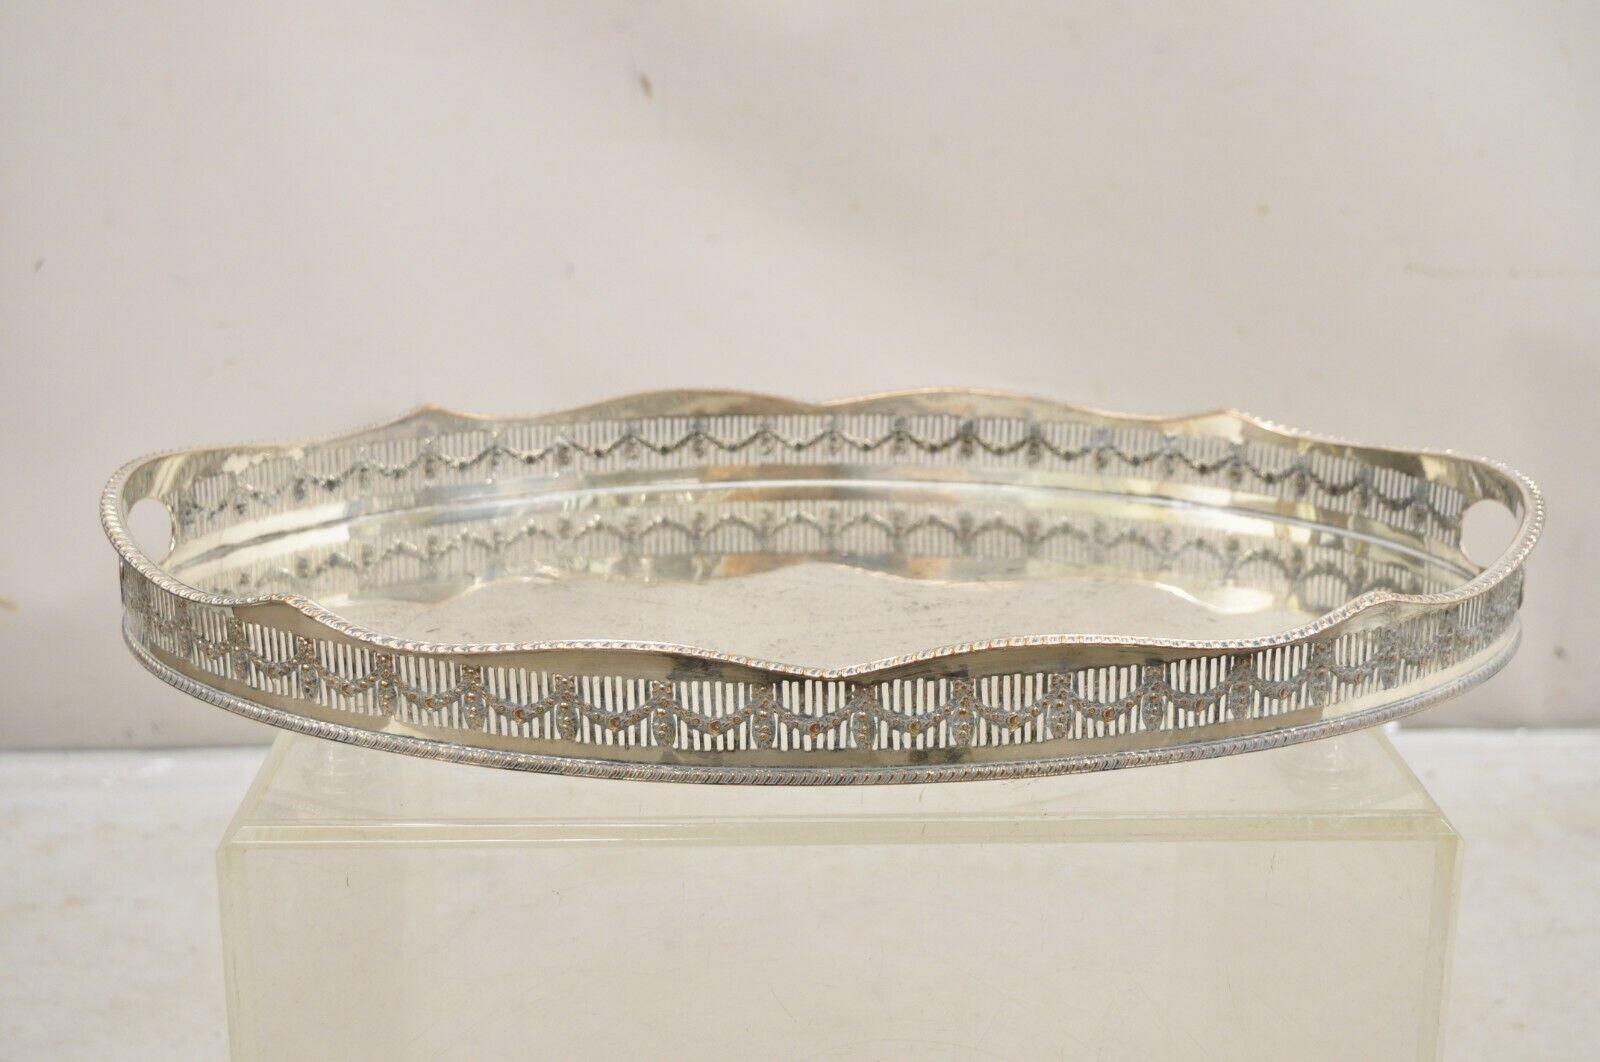 English Sheffield William Adams Silver Plated Pierced Drape Gallery Oval Tray with Handles. Circa Mid 20th Century. Measurements:  2.5